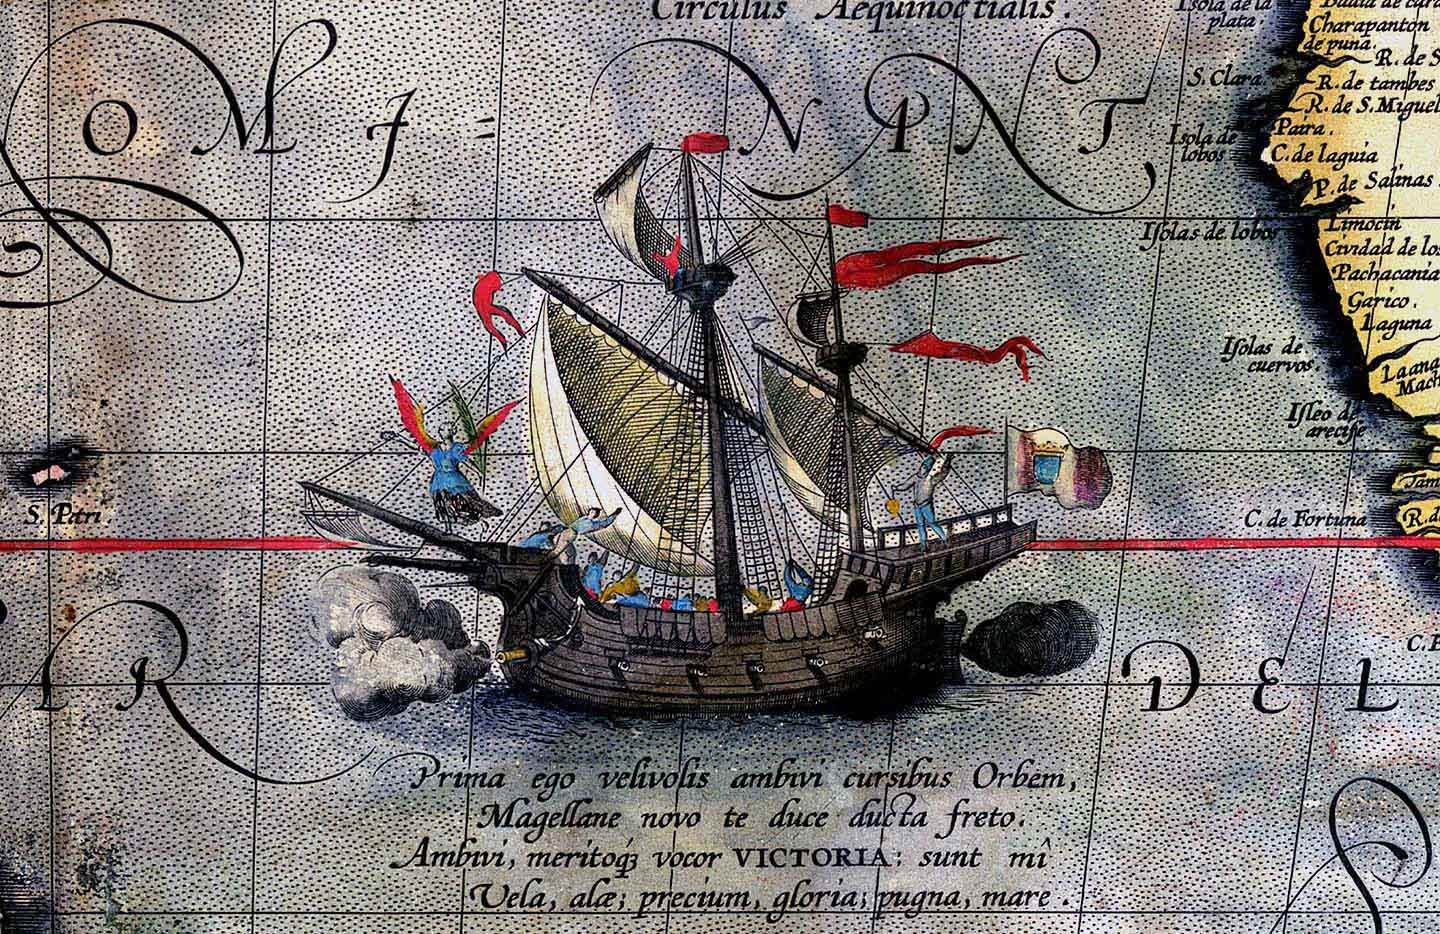 Ship sailing on a historical map